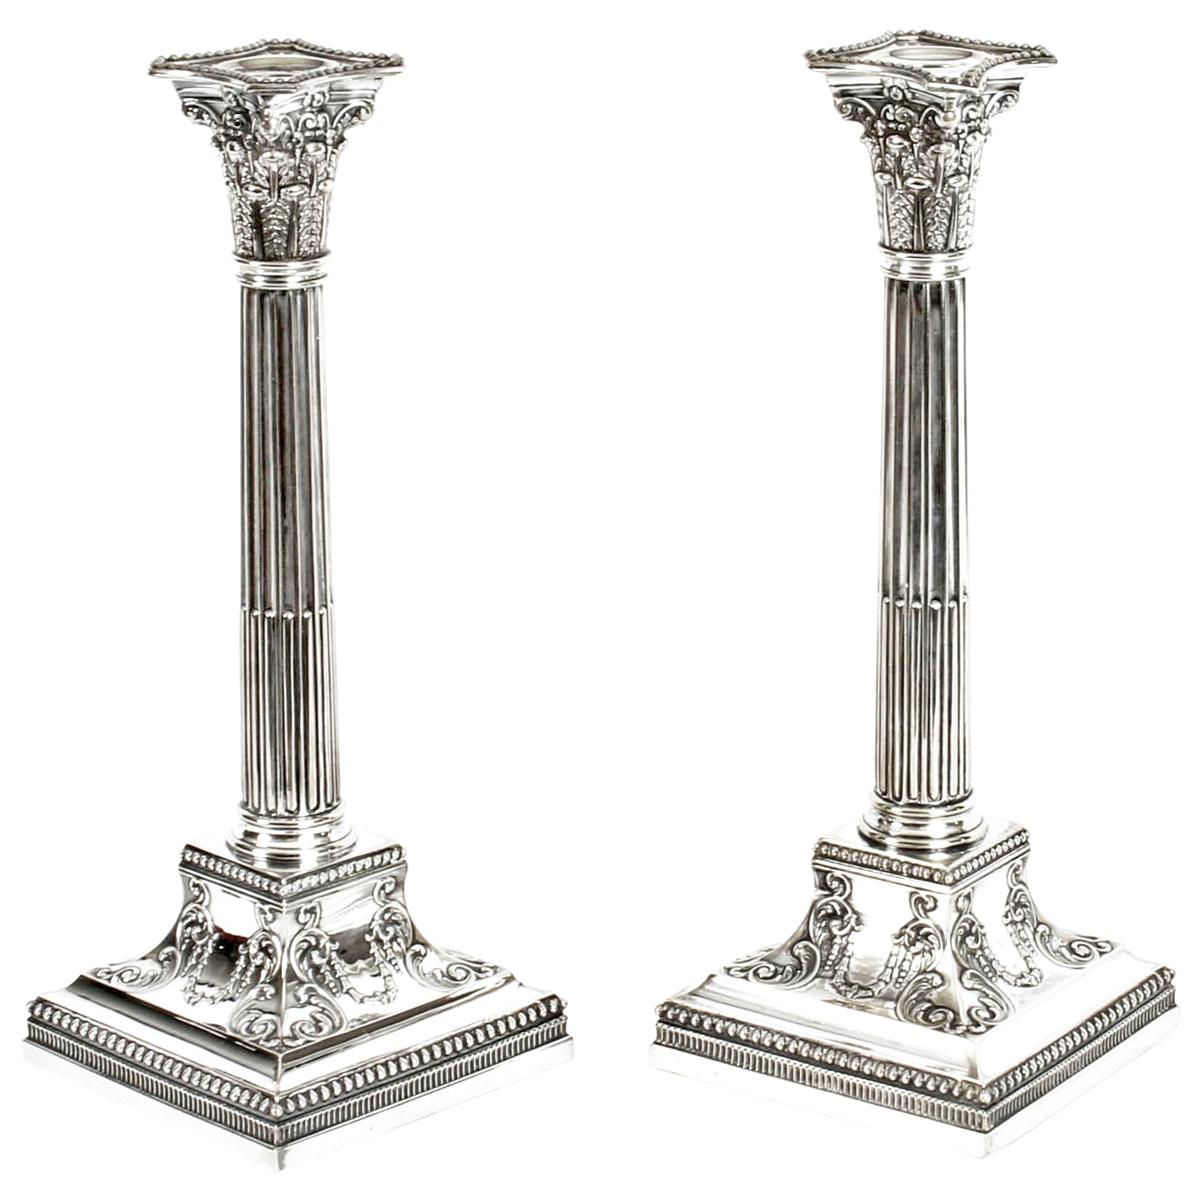 Antique Pair of Silver Plated Candlesticks by James Dixon, 19th Century